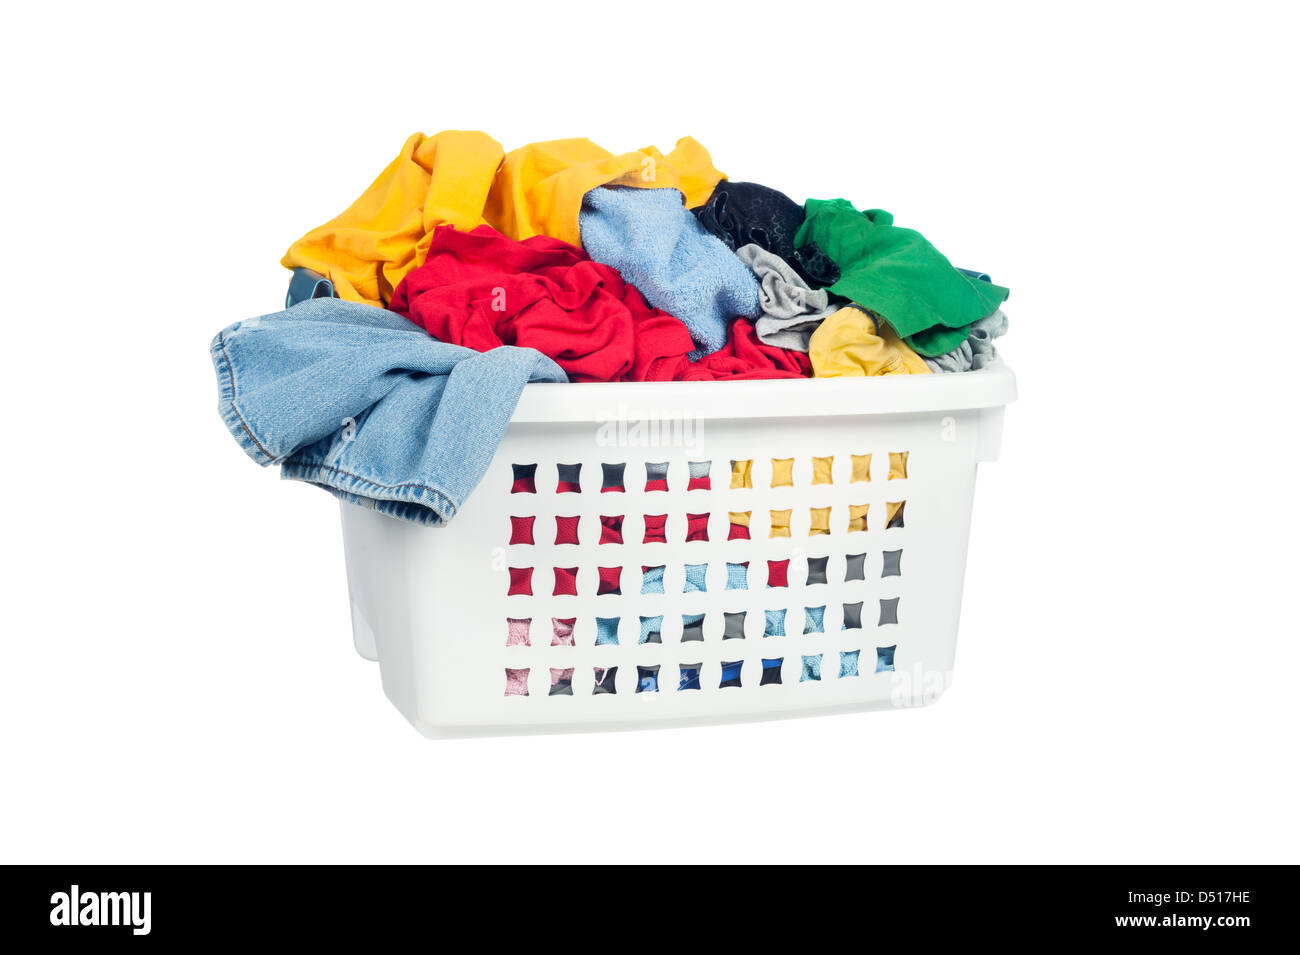 A laundry basket full of dirty clothes ready to be washed during daily  chores Stock Photo - Alamy